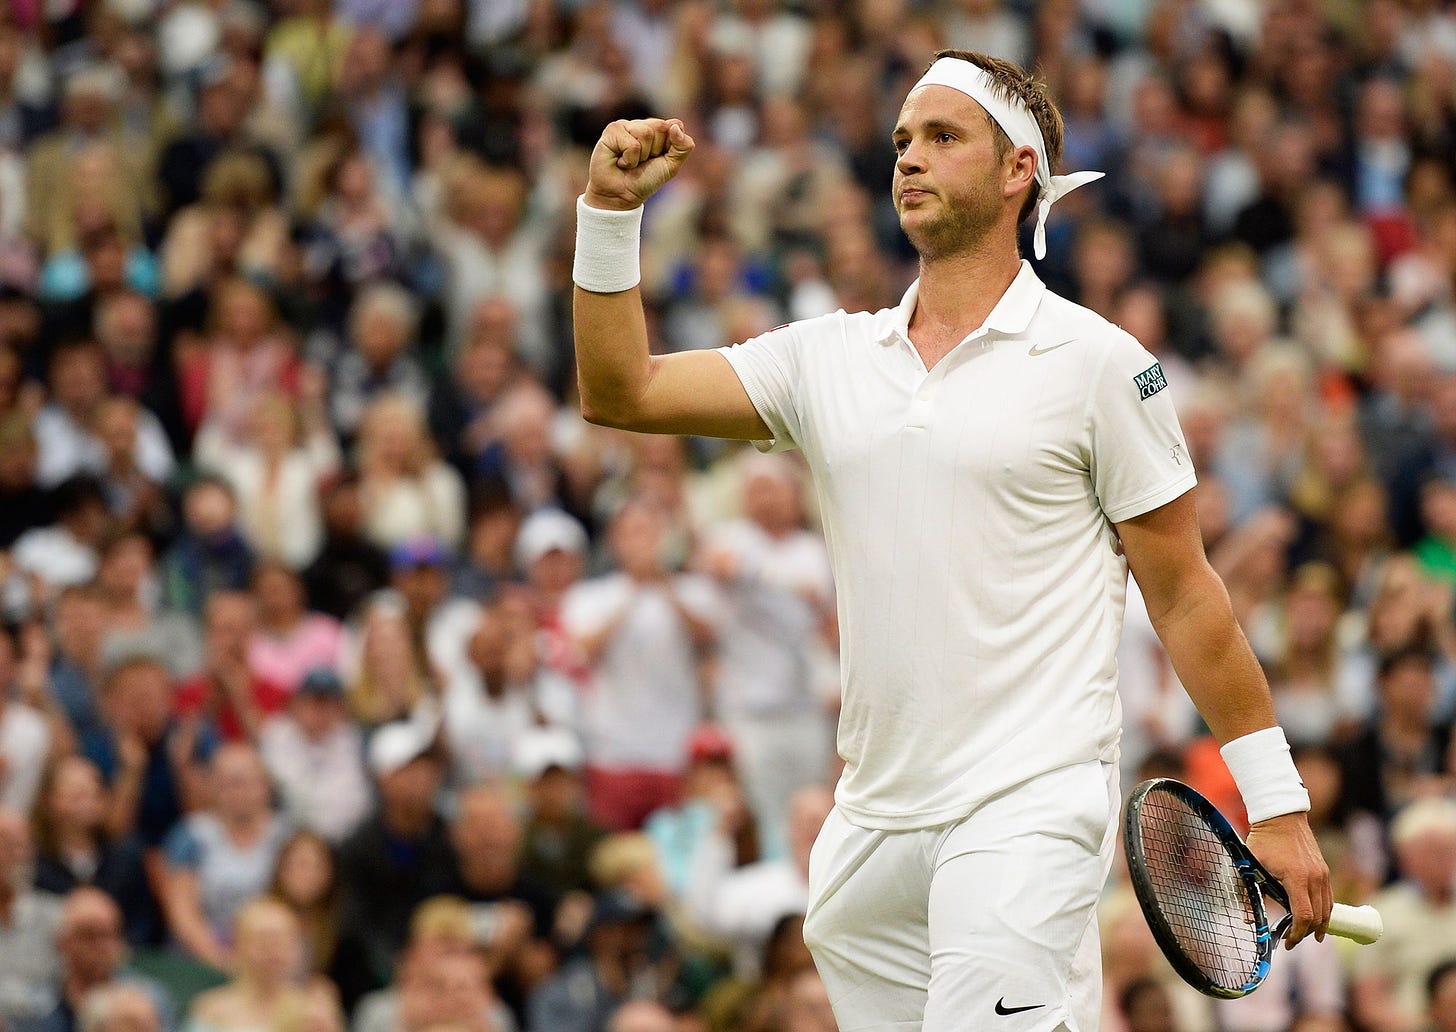 Marcus Willis's (Very) Brief Wimbledon Fairy Tale | The New Yorker